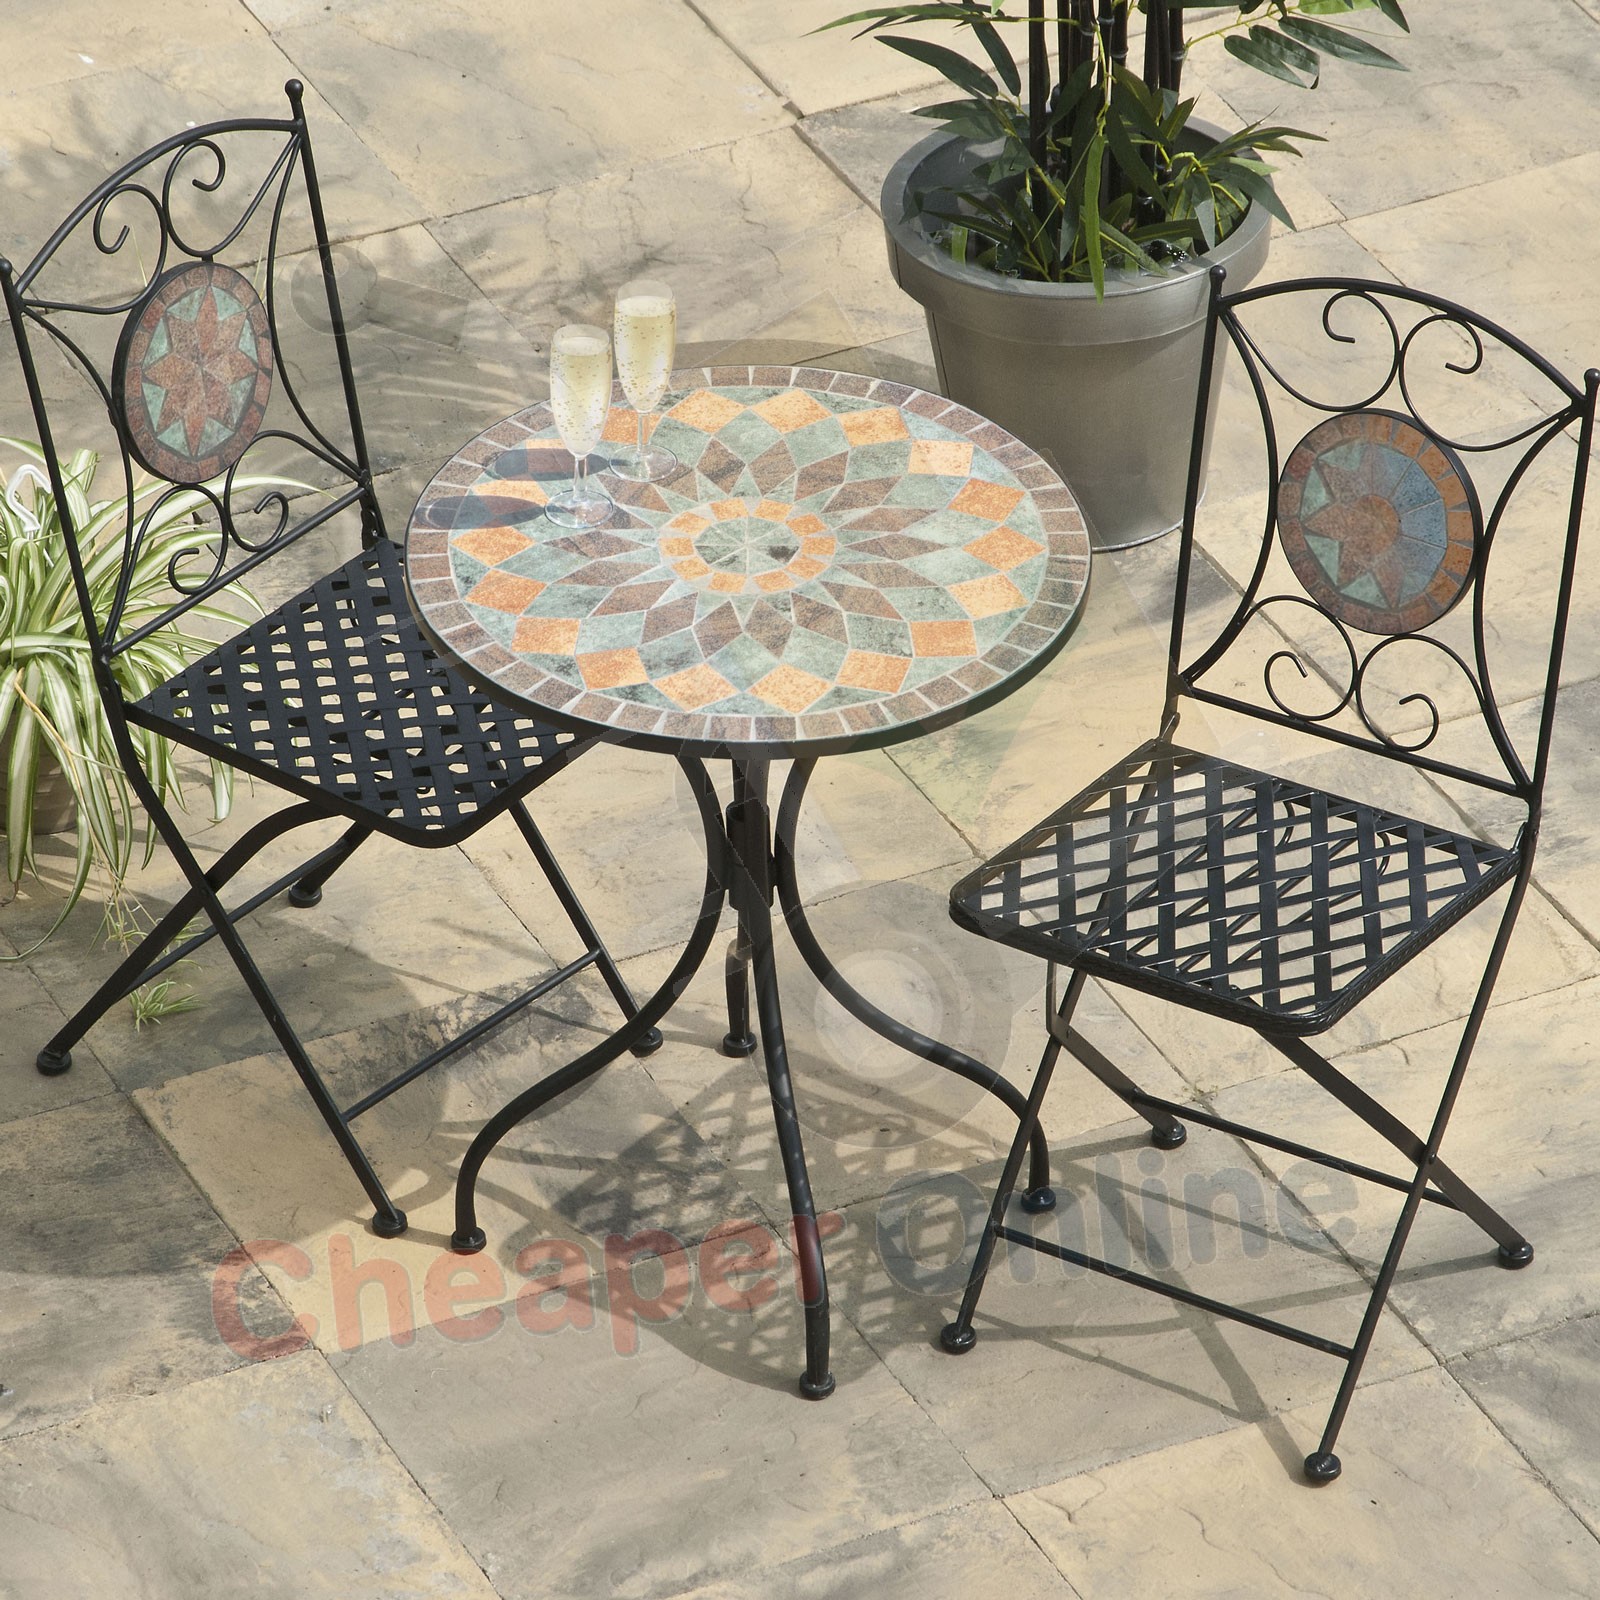 decorating mosaictable bistro set mosaic tile outdoor side table how small metal accent lewis wood espresso console garden sprayer ethan allen night tables support marble effect